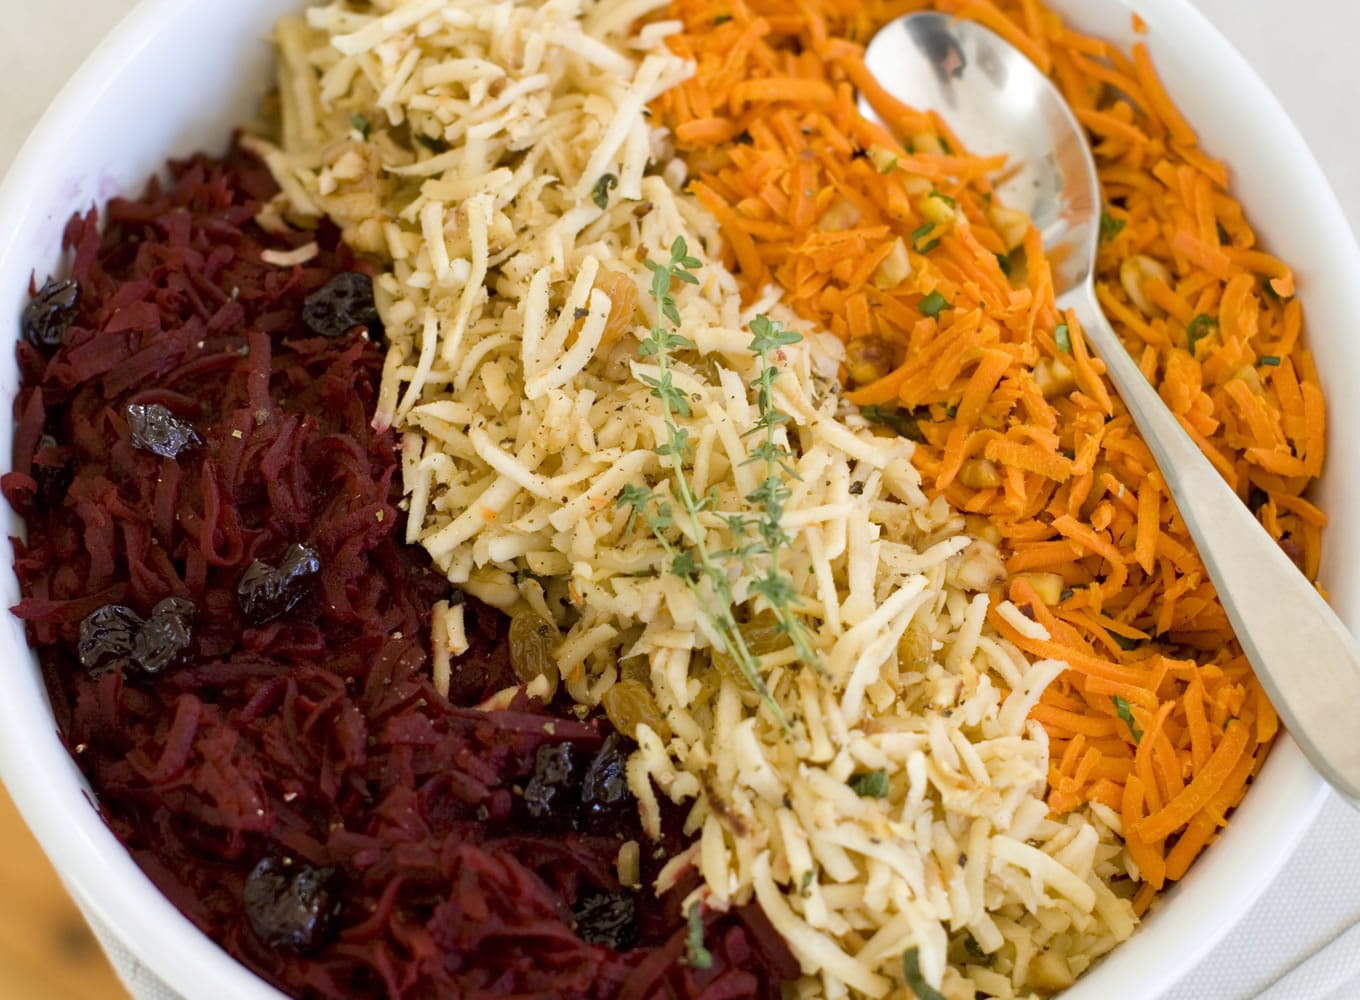 Shredded Beets With Balsamic, from left, Shredded Parsnips With Walnuts, and Shredded Spicy Carrots.